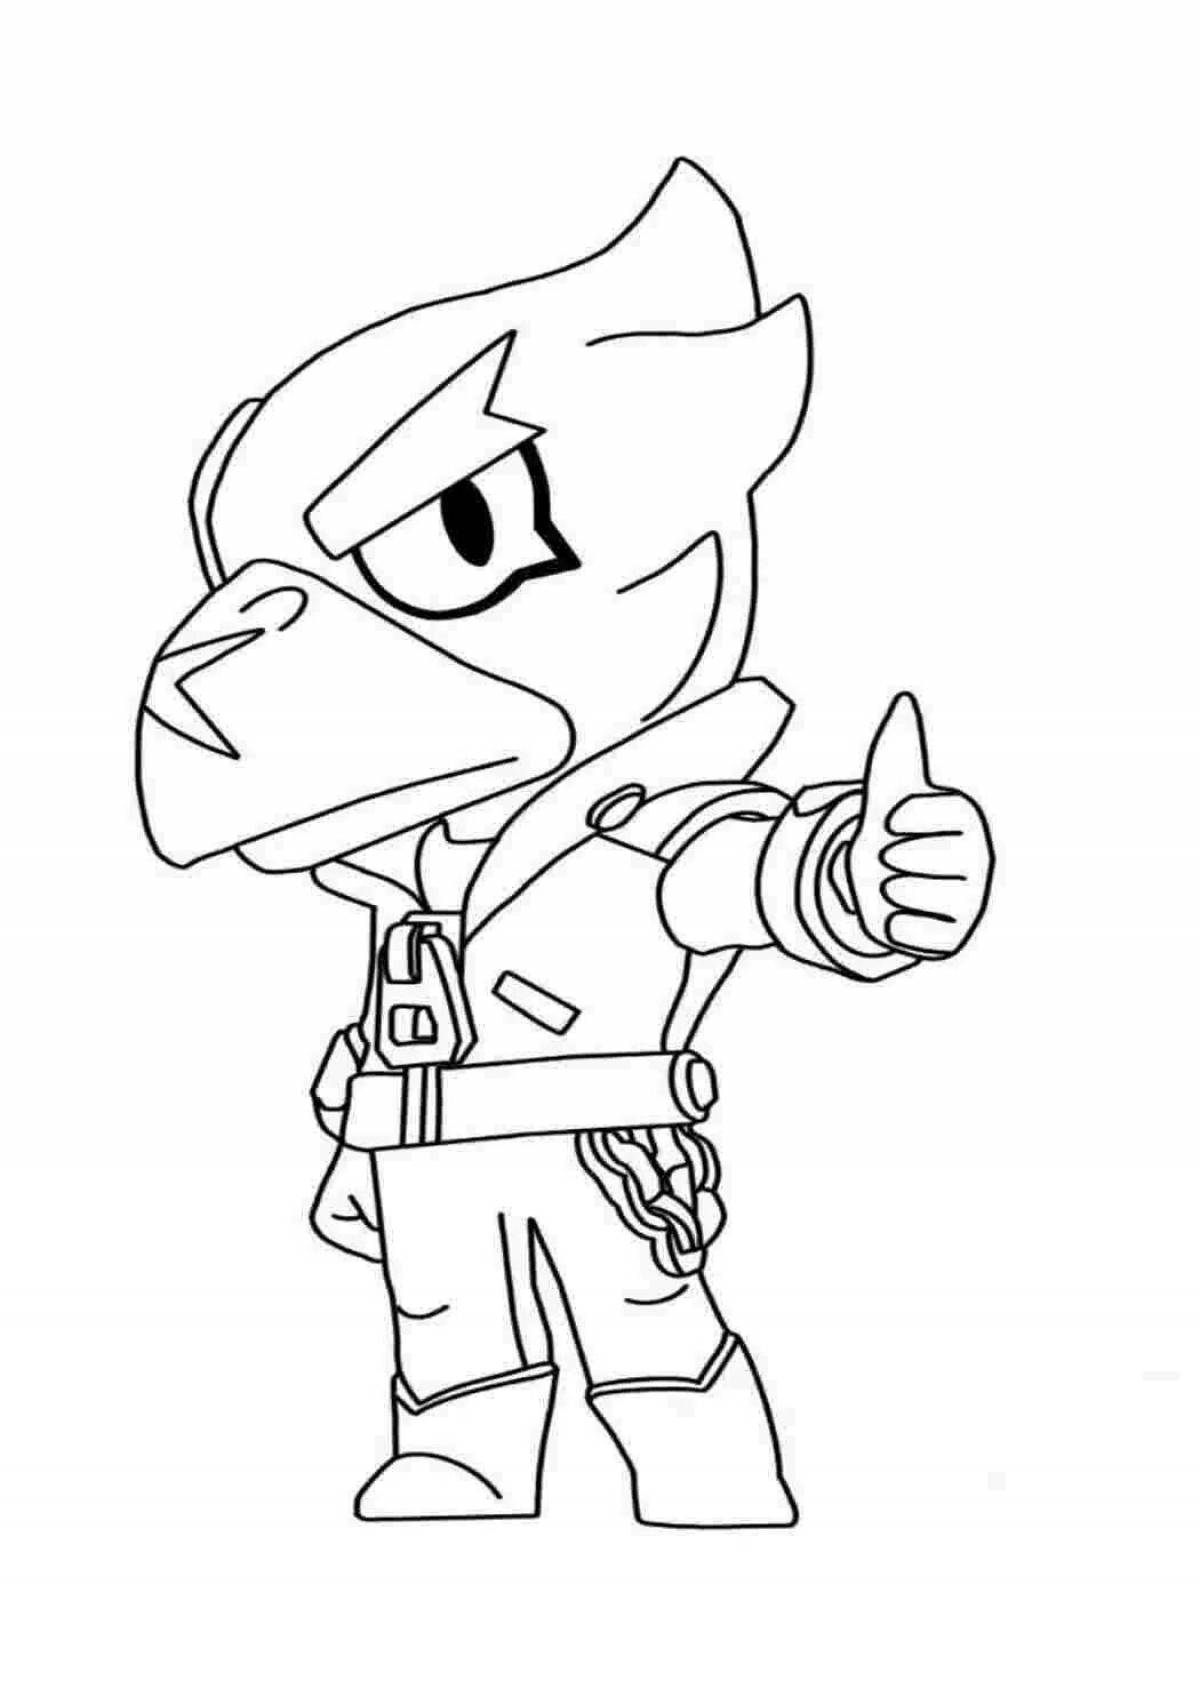 Fun brawl stars coloring pages for boys